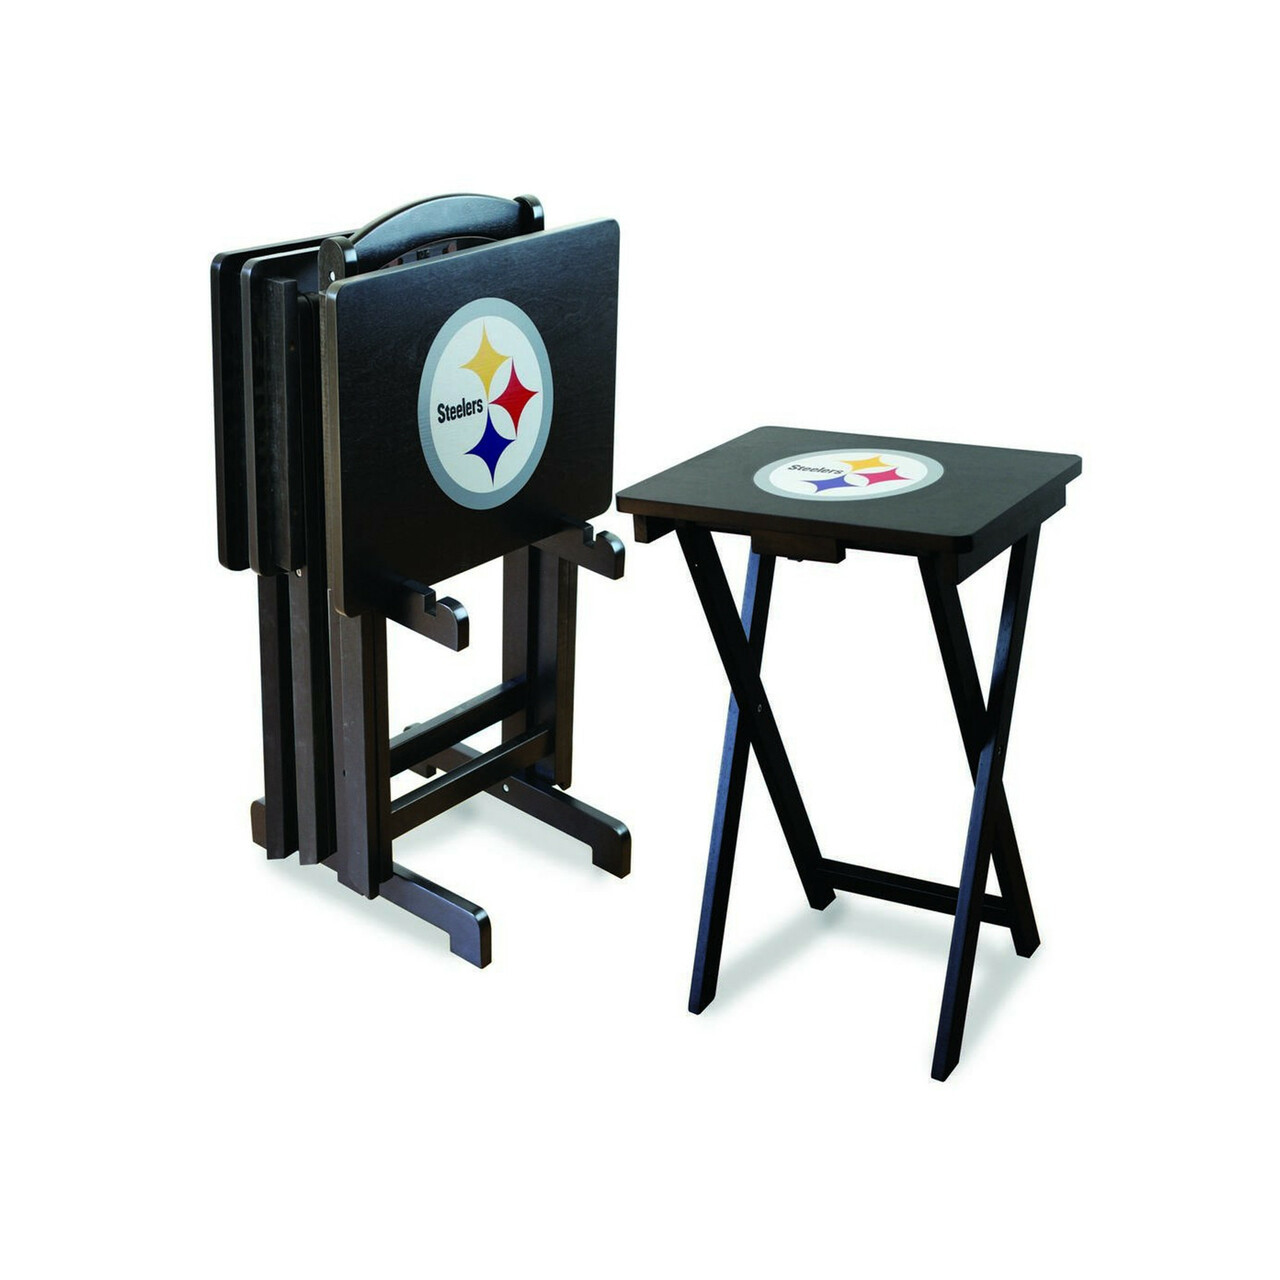 86-1004, Pittsburg, Steelers, TV, Snack, Tray, Set, NFL, FREE SHIPPING, Imperial, 720808610040